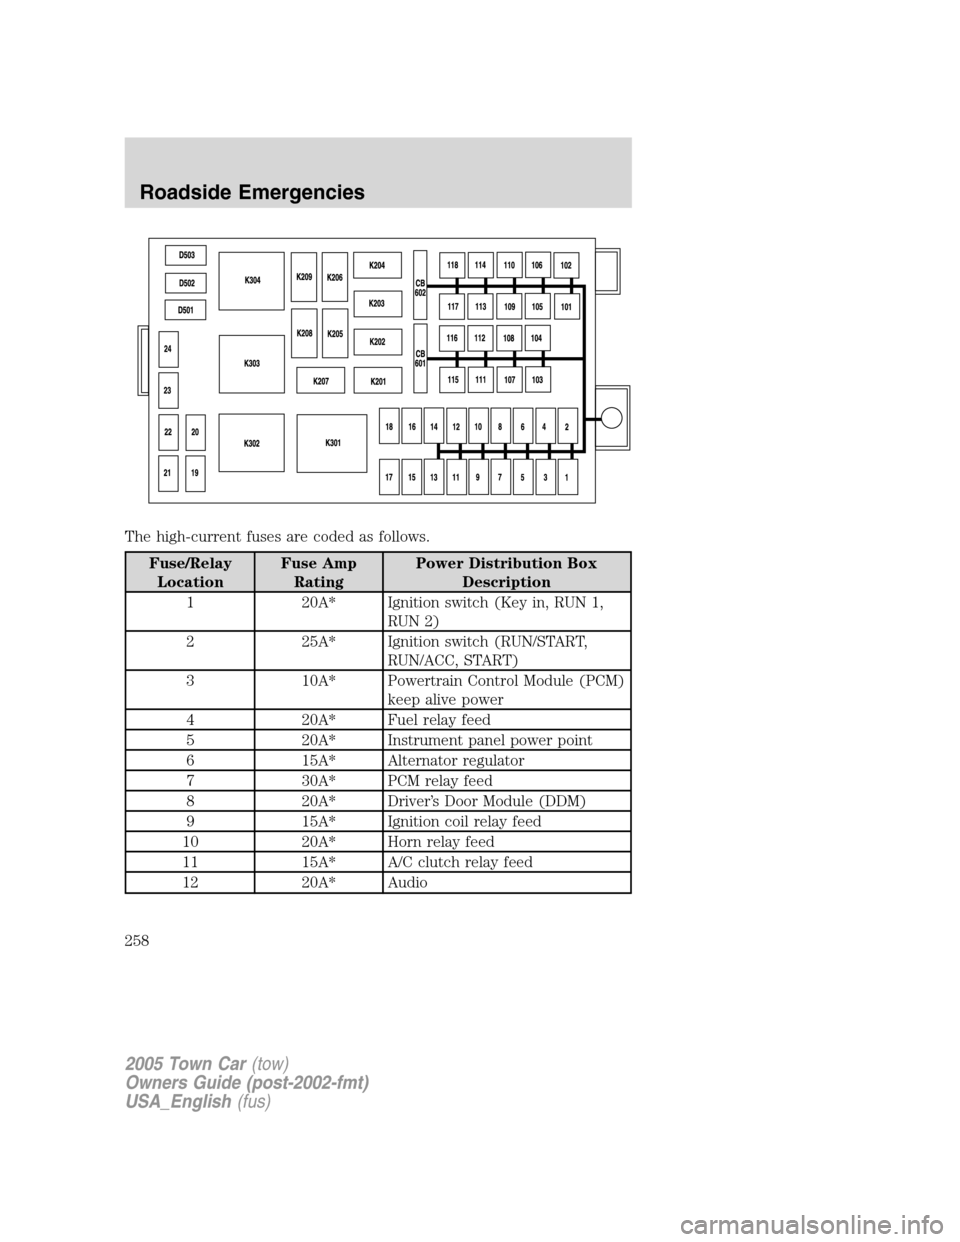 LINCOLN TOWN CAR 2005  Owners Manual The high-current fuses are coded as follows.
Fuse/Relay
LocationFuse Amp
RatingPower Distribution Box
Description
1 20A* Ignition switch (Key in, RUN 1,
RUN 2)
2 25A* Ignition switch (RUN/START,
RUN/A